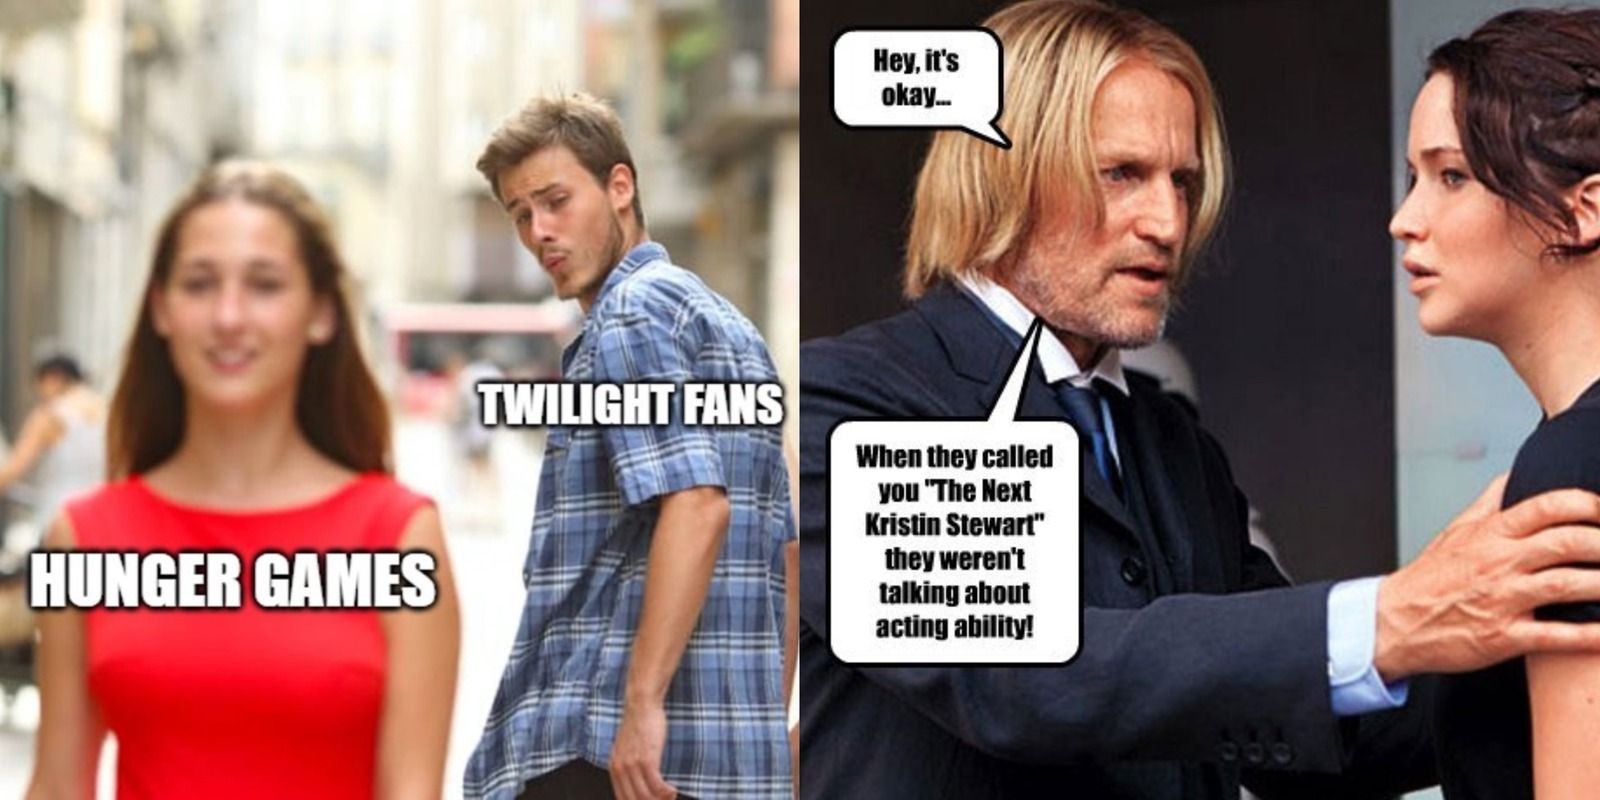 10 Hilarious Twilight Vs The Hunger Games Memes That Make Us Sparkle With Laughter Wechoiceblogger